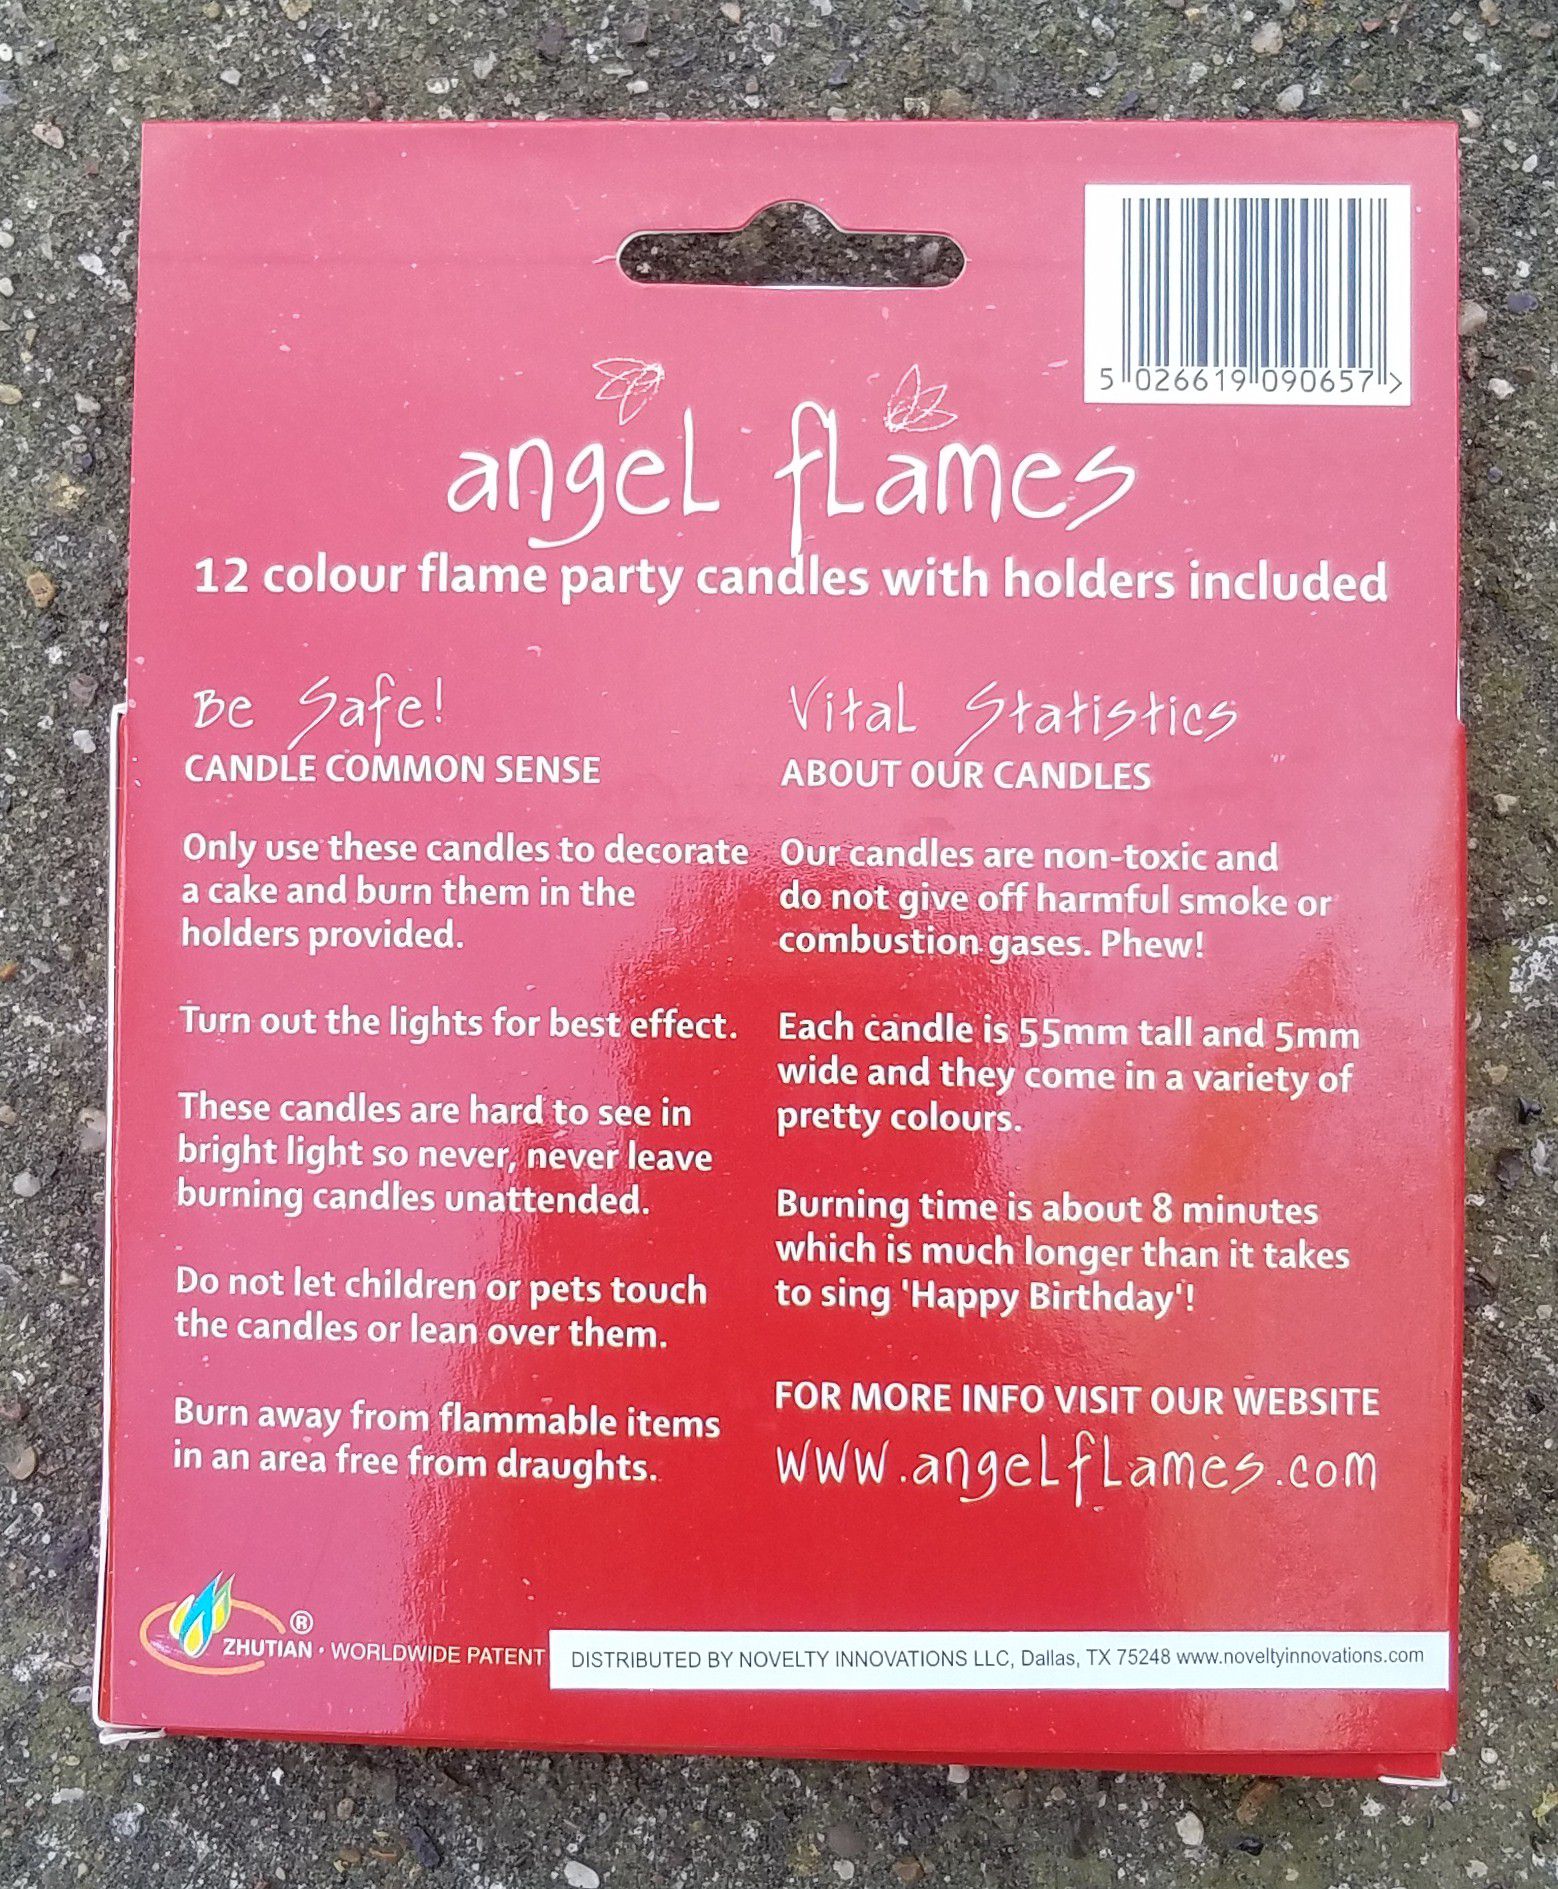 Angel Flames Birthday Cake Candles with colored flames